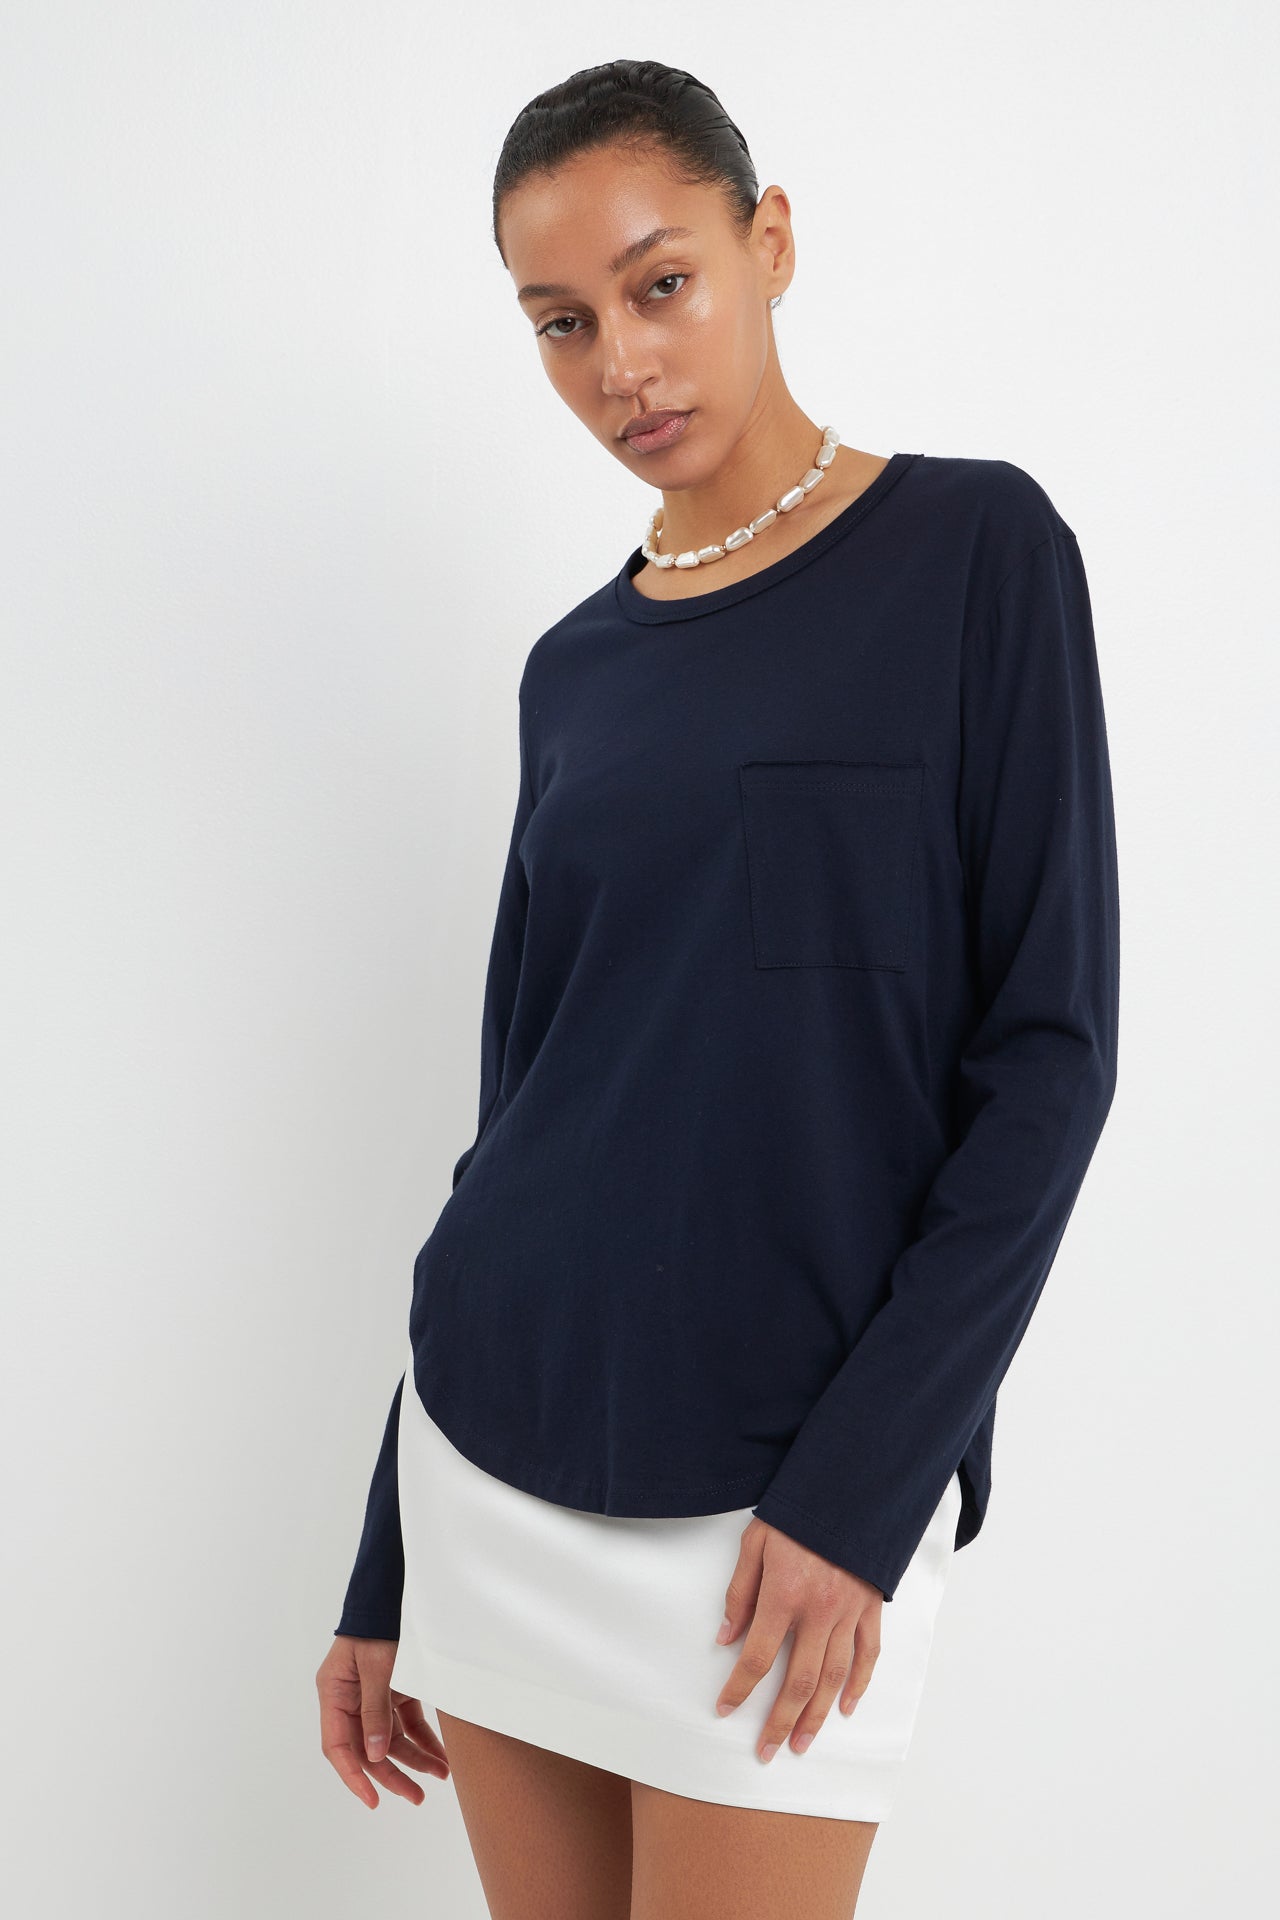 GREY LAB - Classic Round Neck Long Sleeve - TOPS available at Objectrare